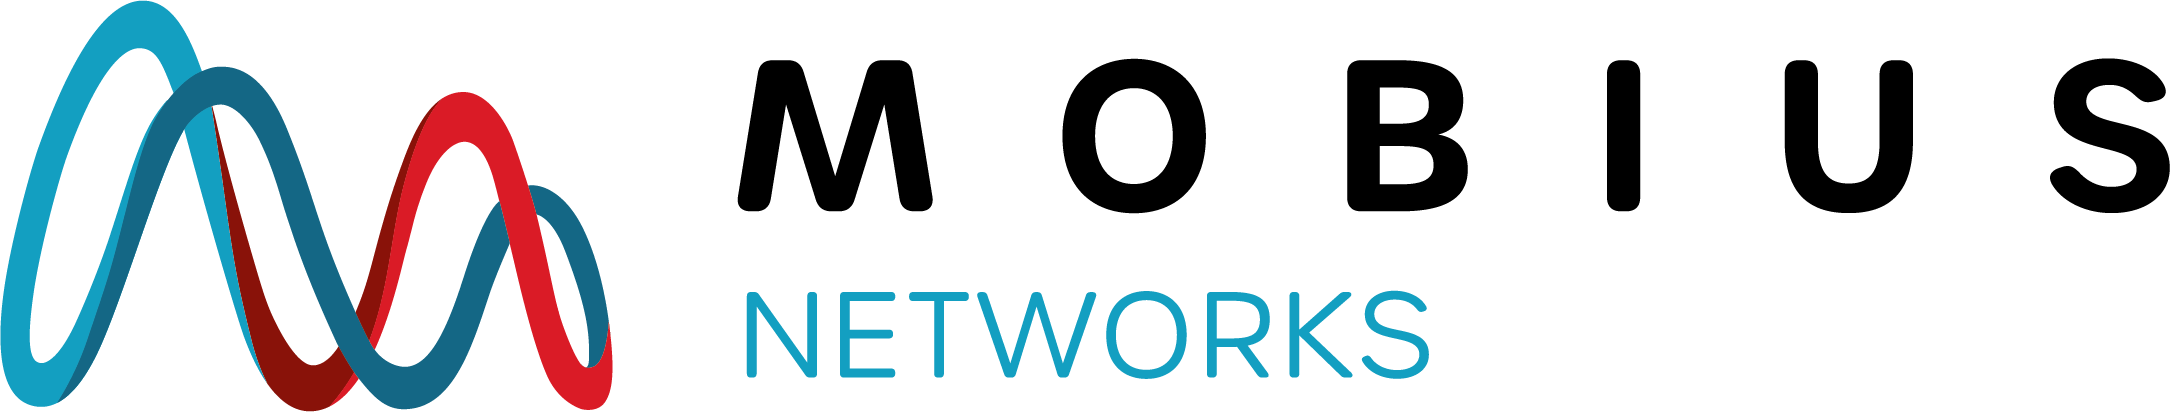 Mobius Networks